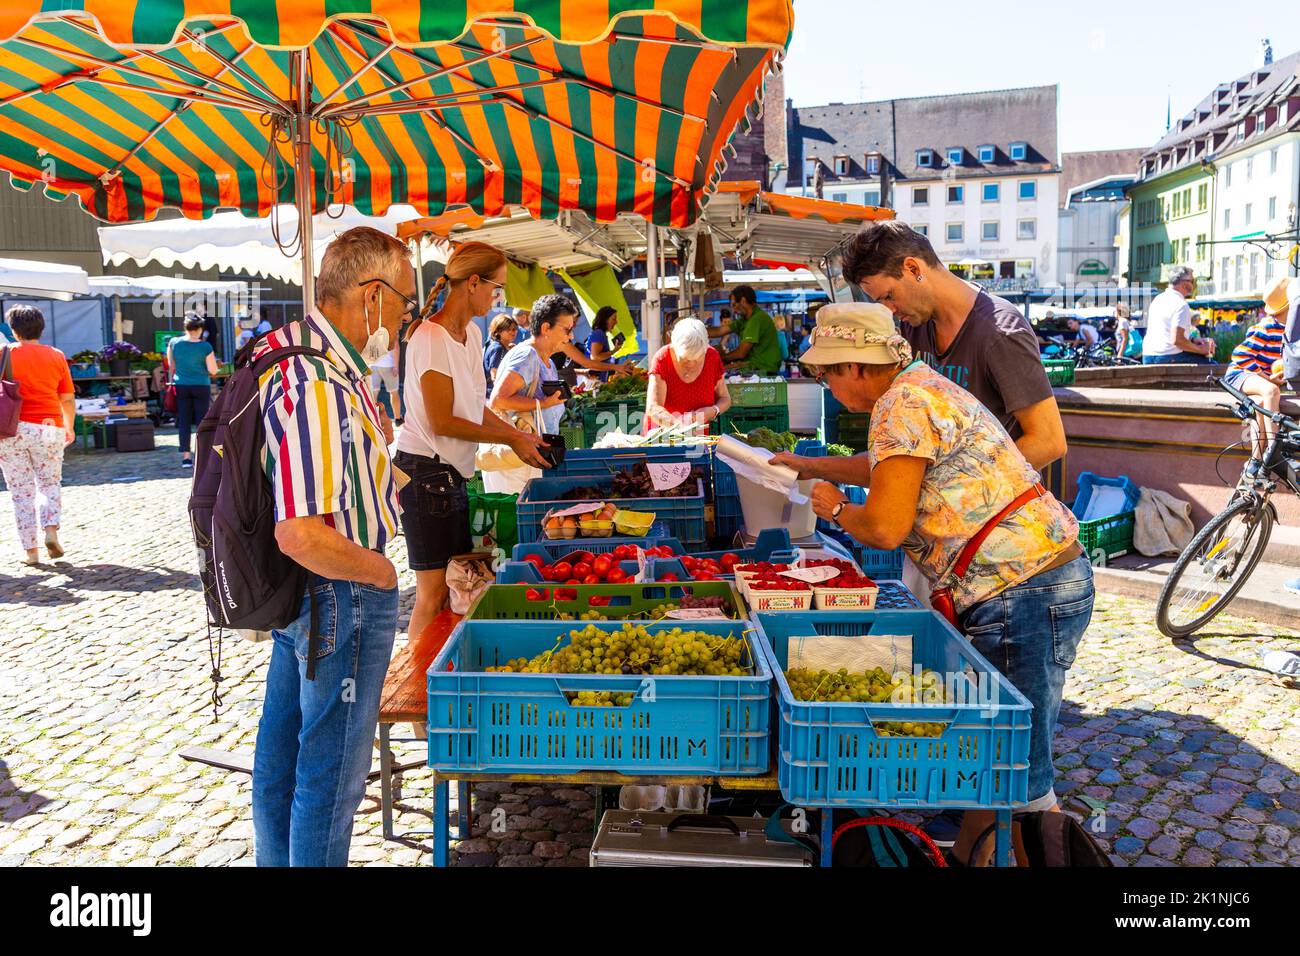 People shopping at a fruit and vegetable stall at Münstermarkt market on the Münsterplatz, Freiburg im Breisgau, Germany Stock Photo